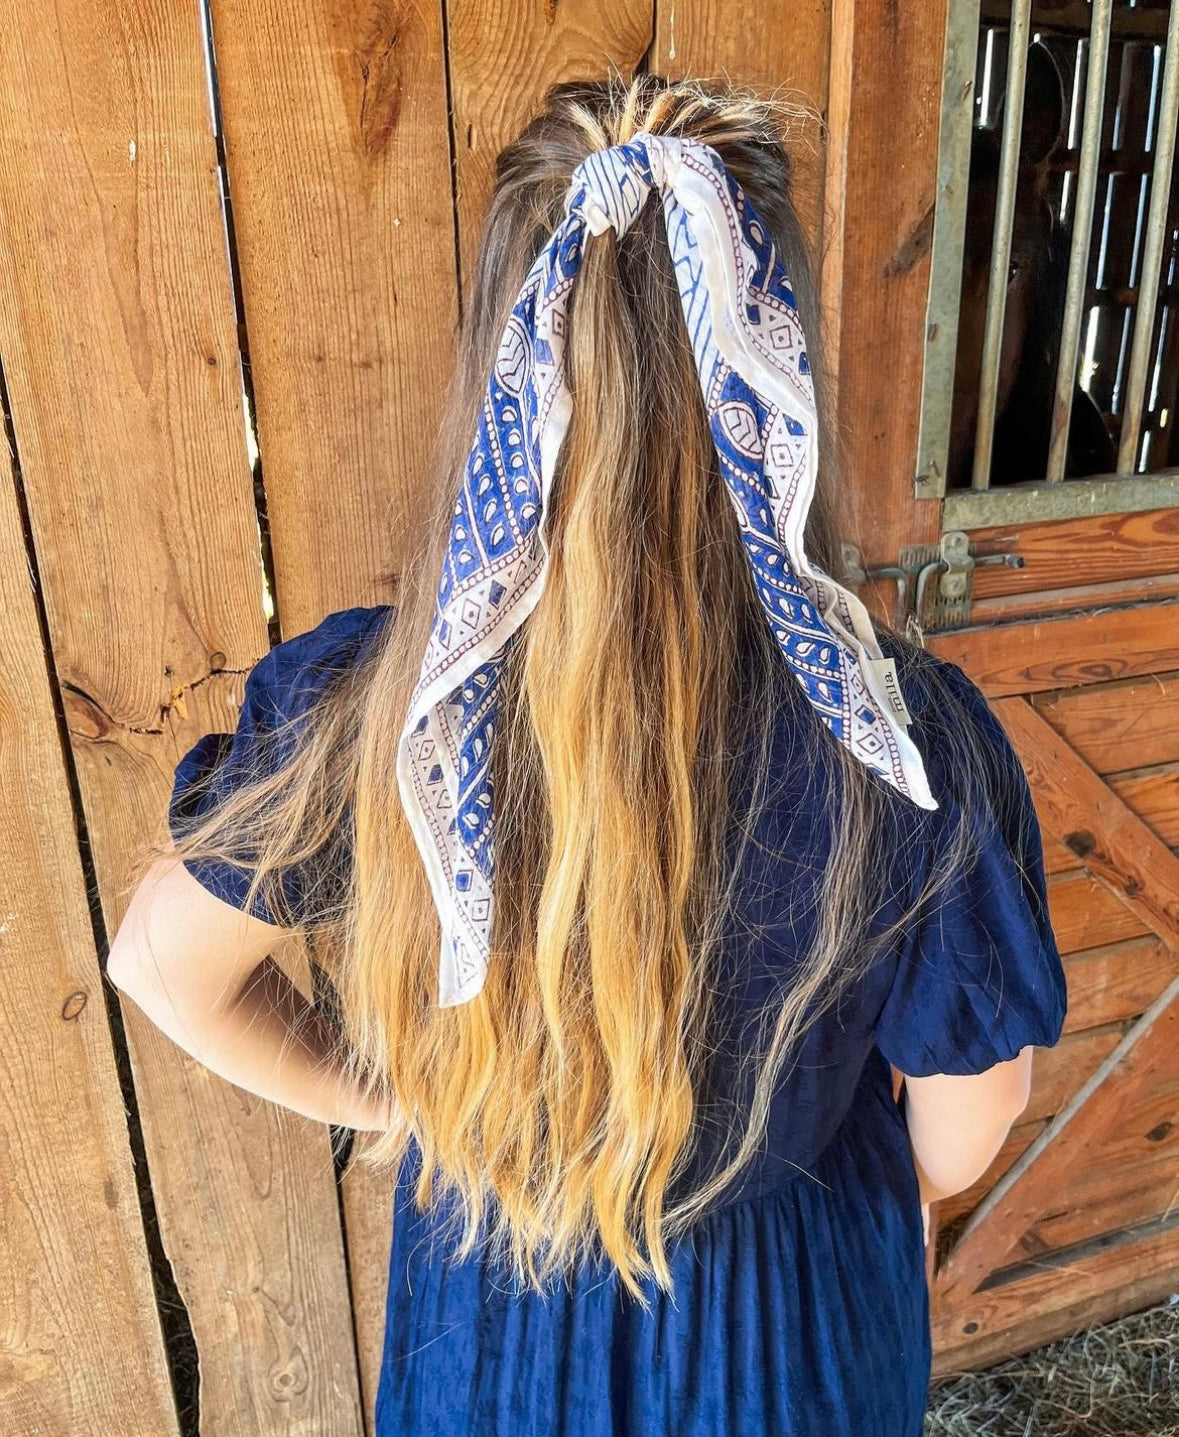 Woman wearing a blue printed scarf styled in hair. Woman is wearing a blue dress standing in front of a barn.